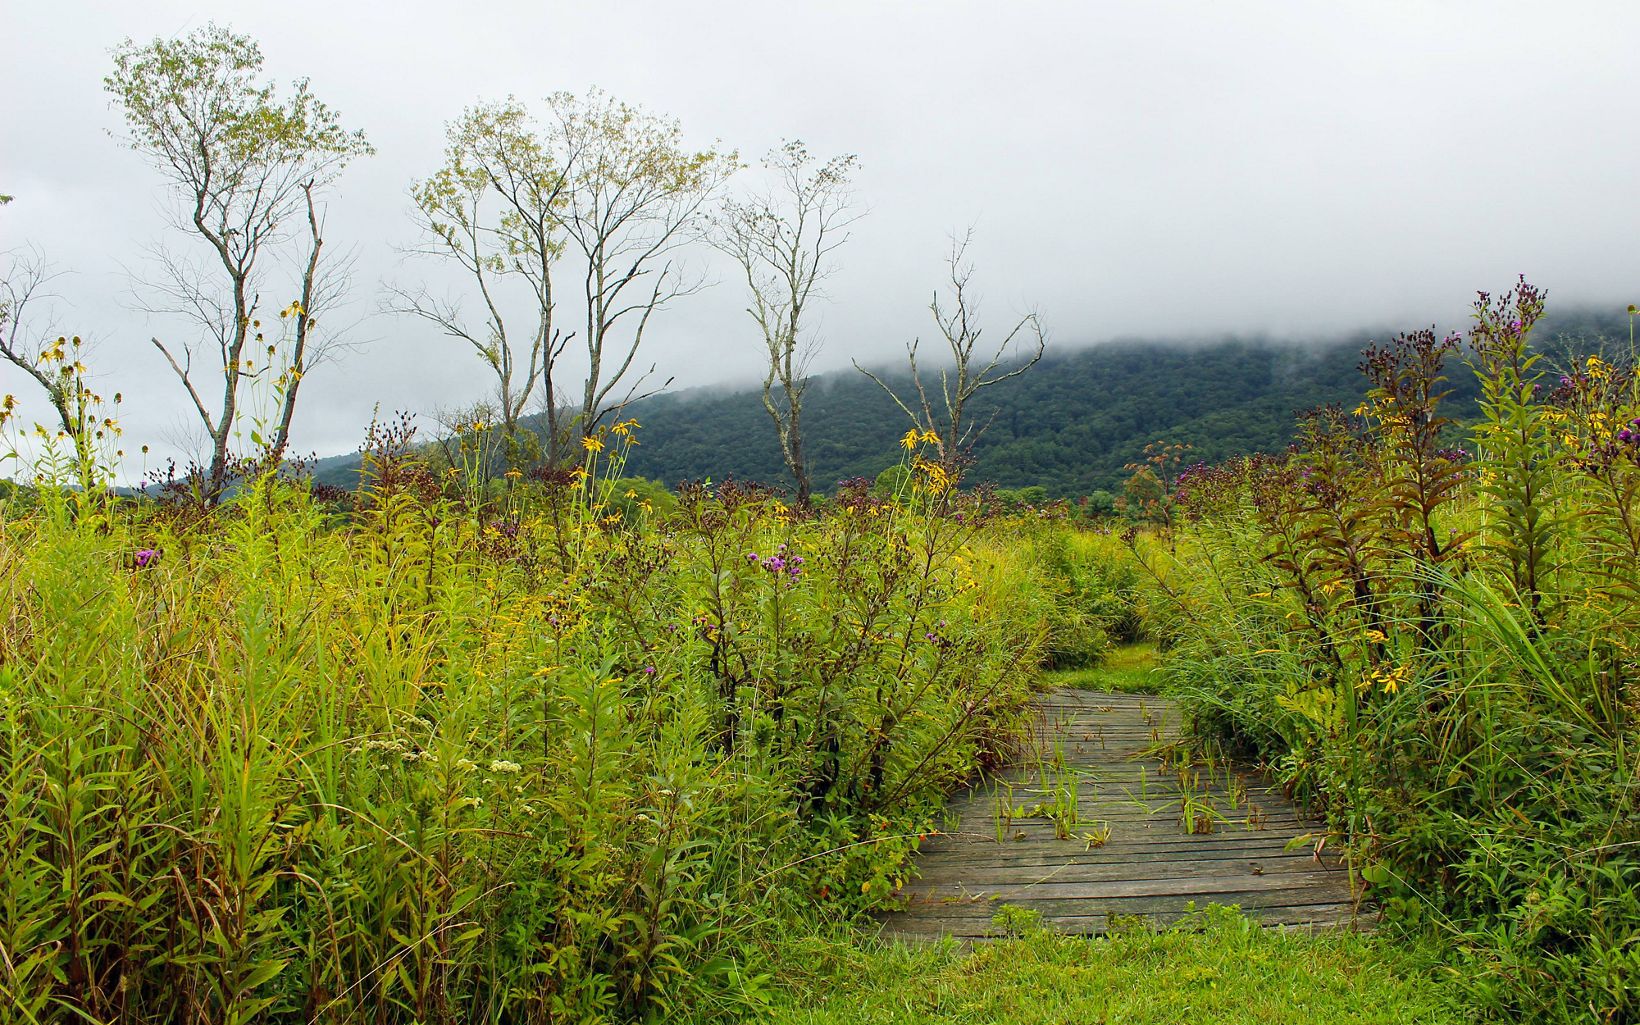 A wooden boardwalk leads a path between tall blooming plants. Heavy white clouds hang low over the mountain ridge in the background.